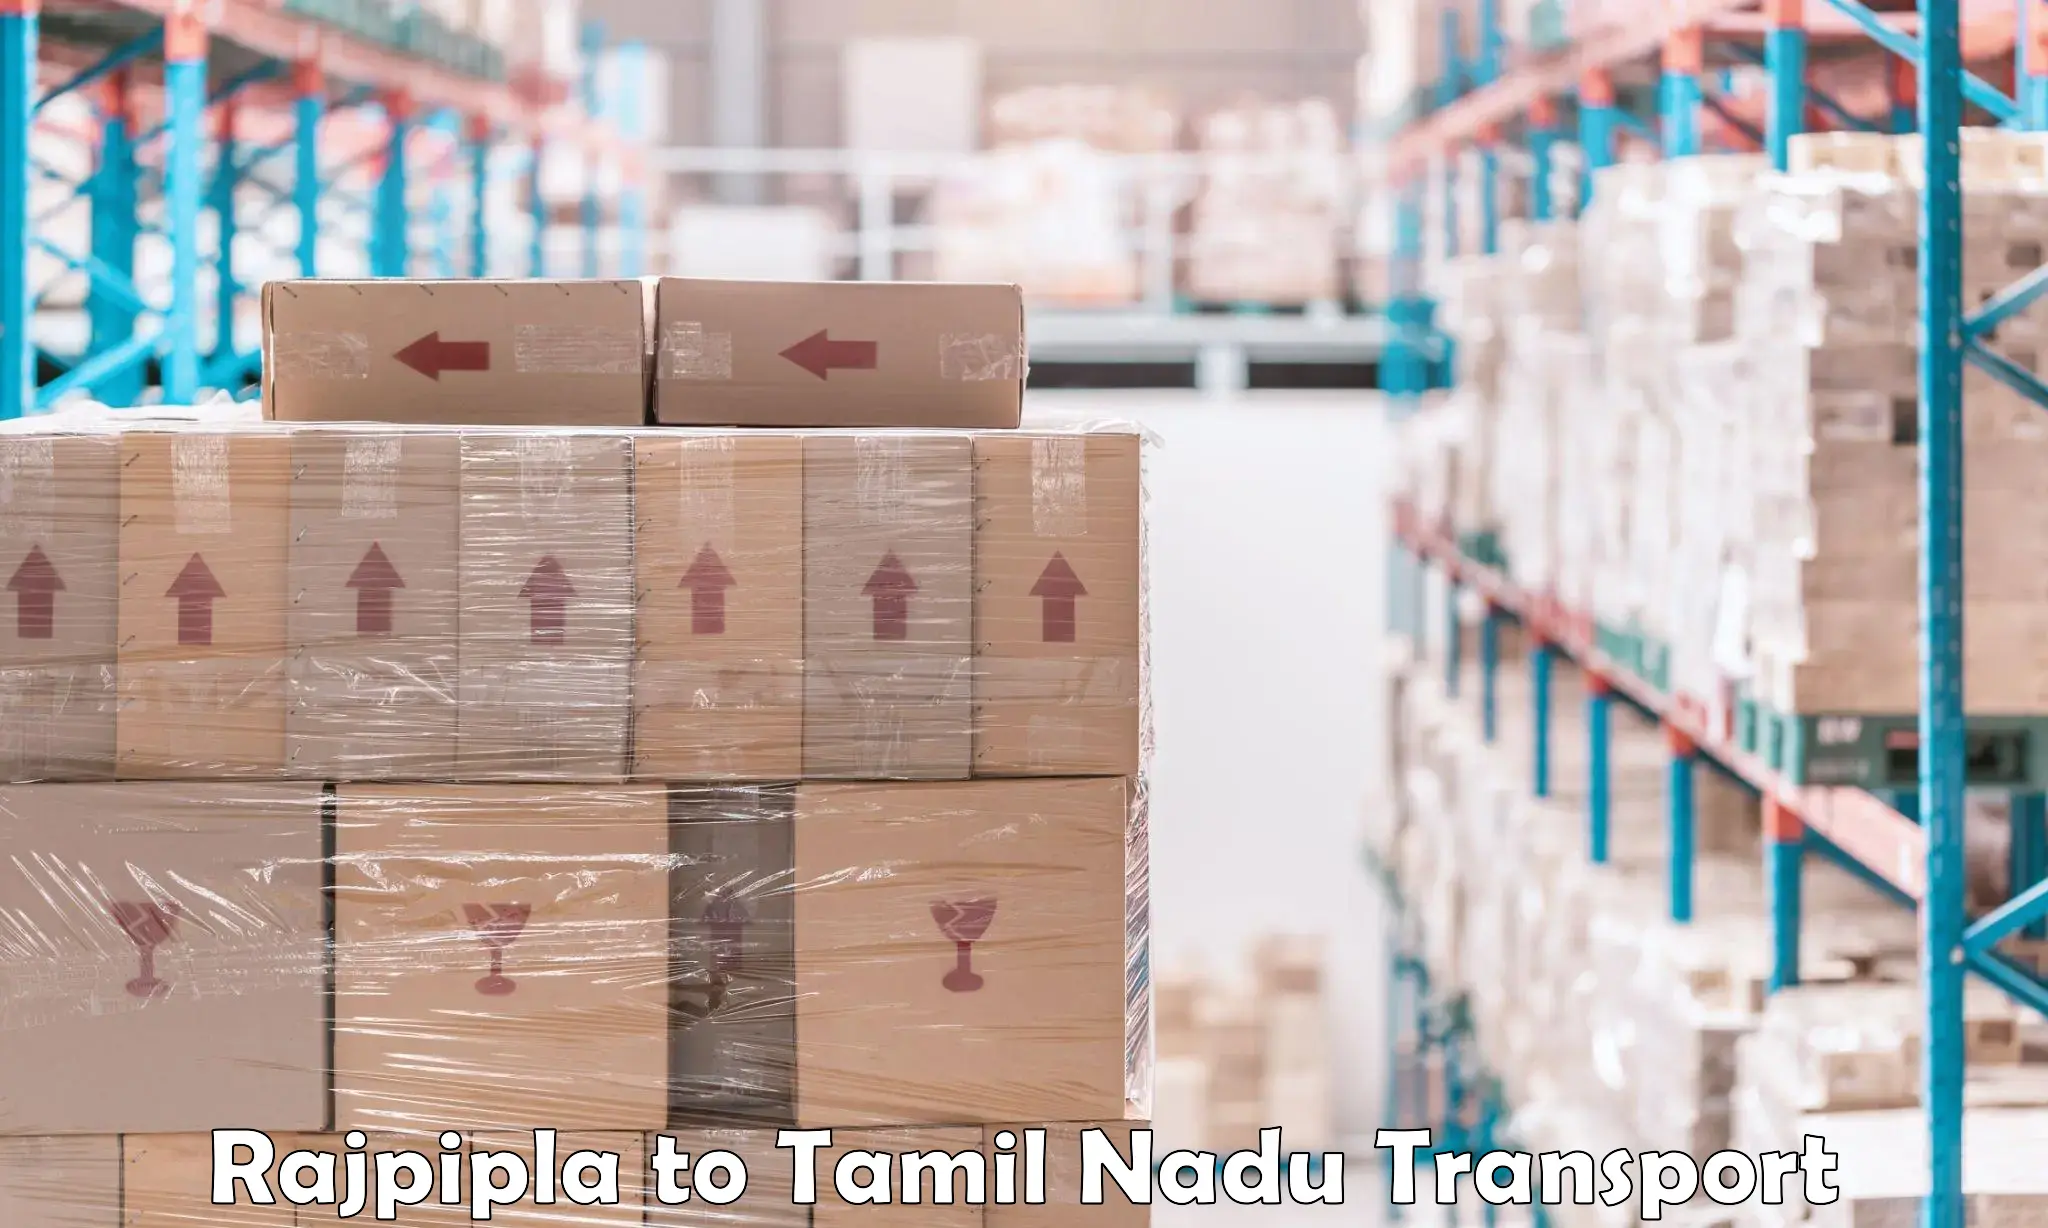 Daily parcel service transport Rajpipla to Vellore Institute of Technology